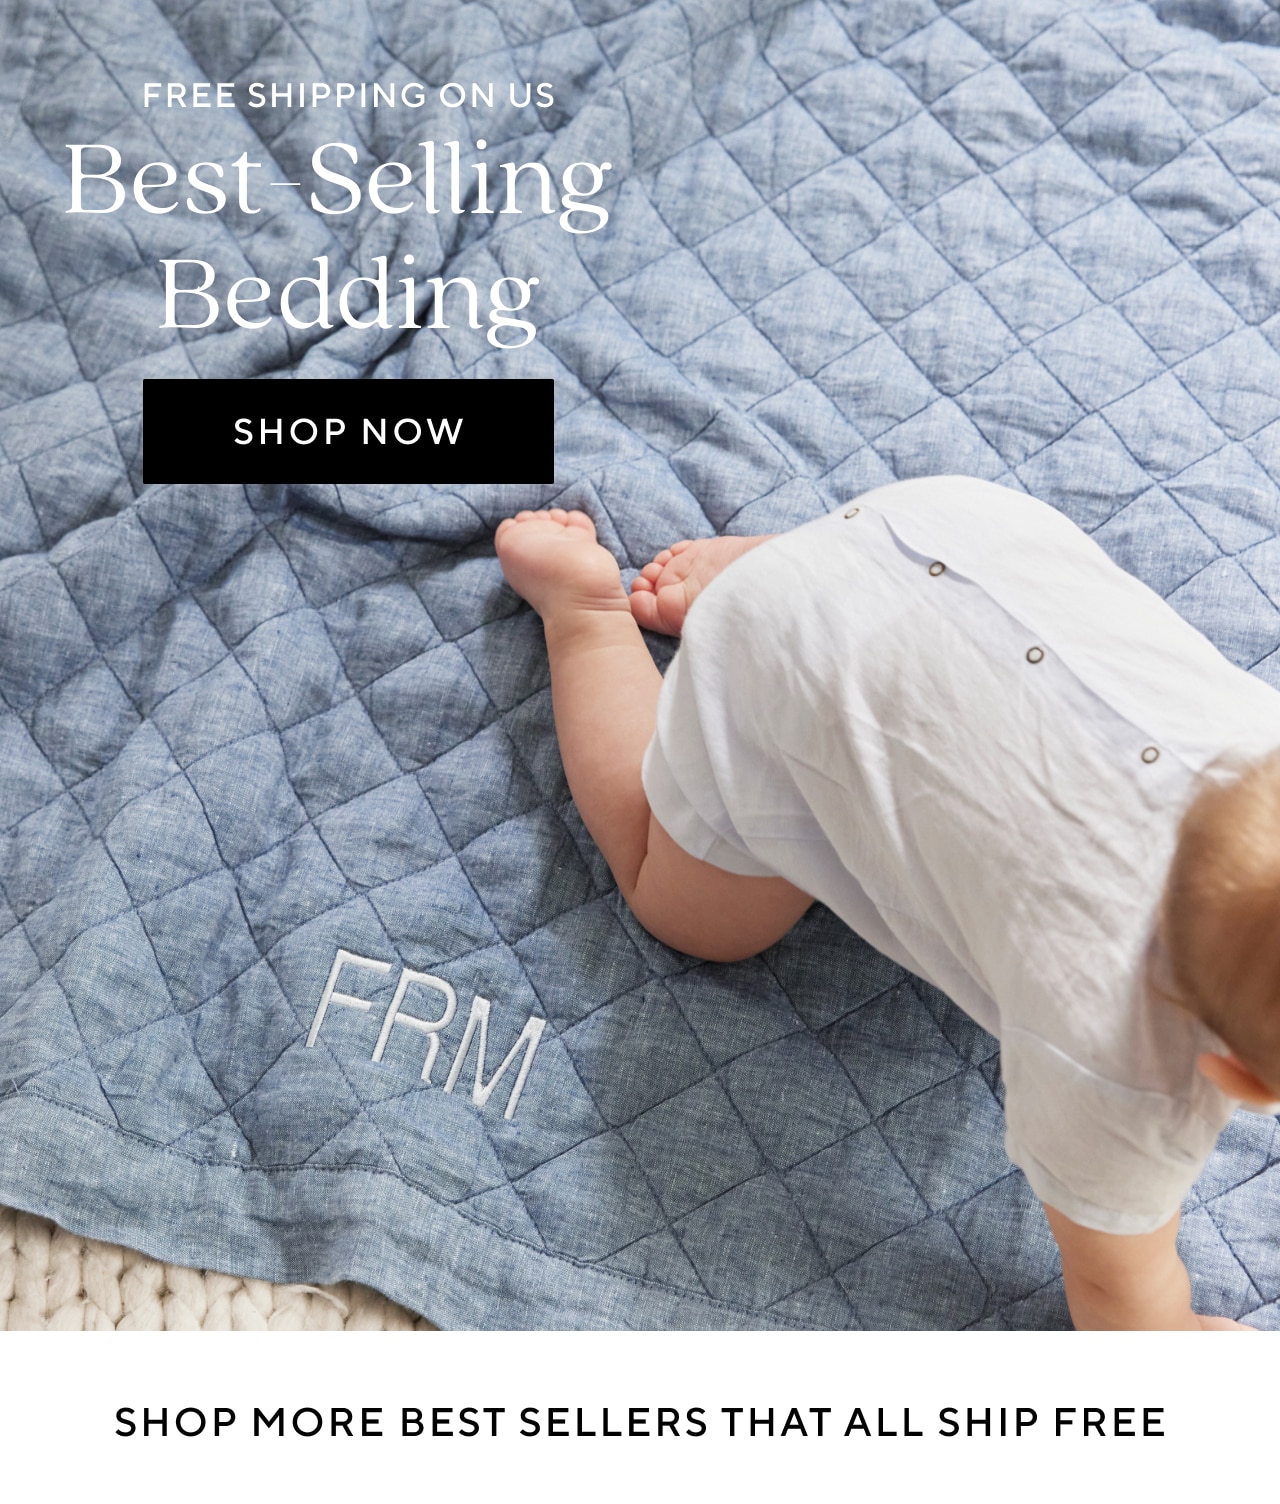 Best Selling Bedding